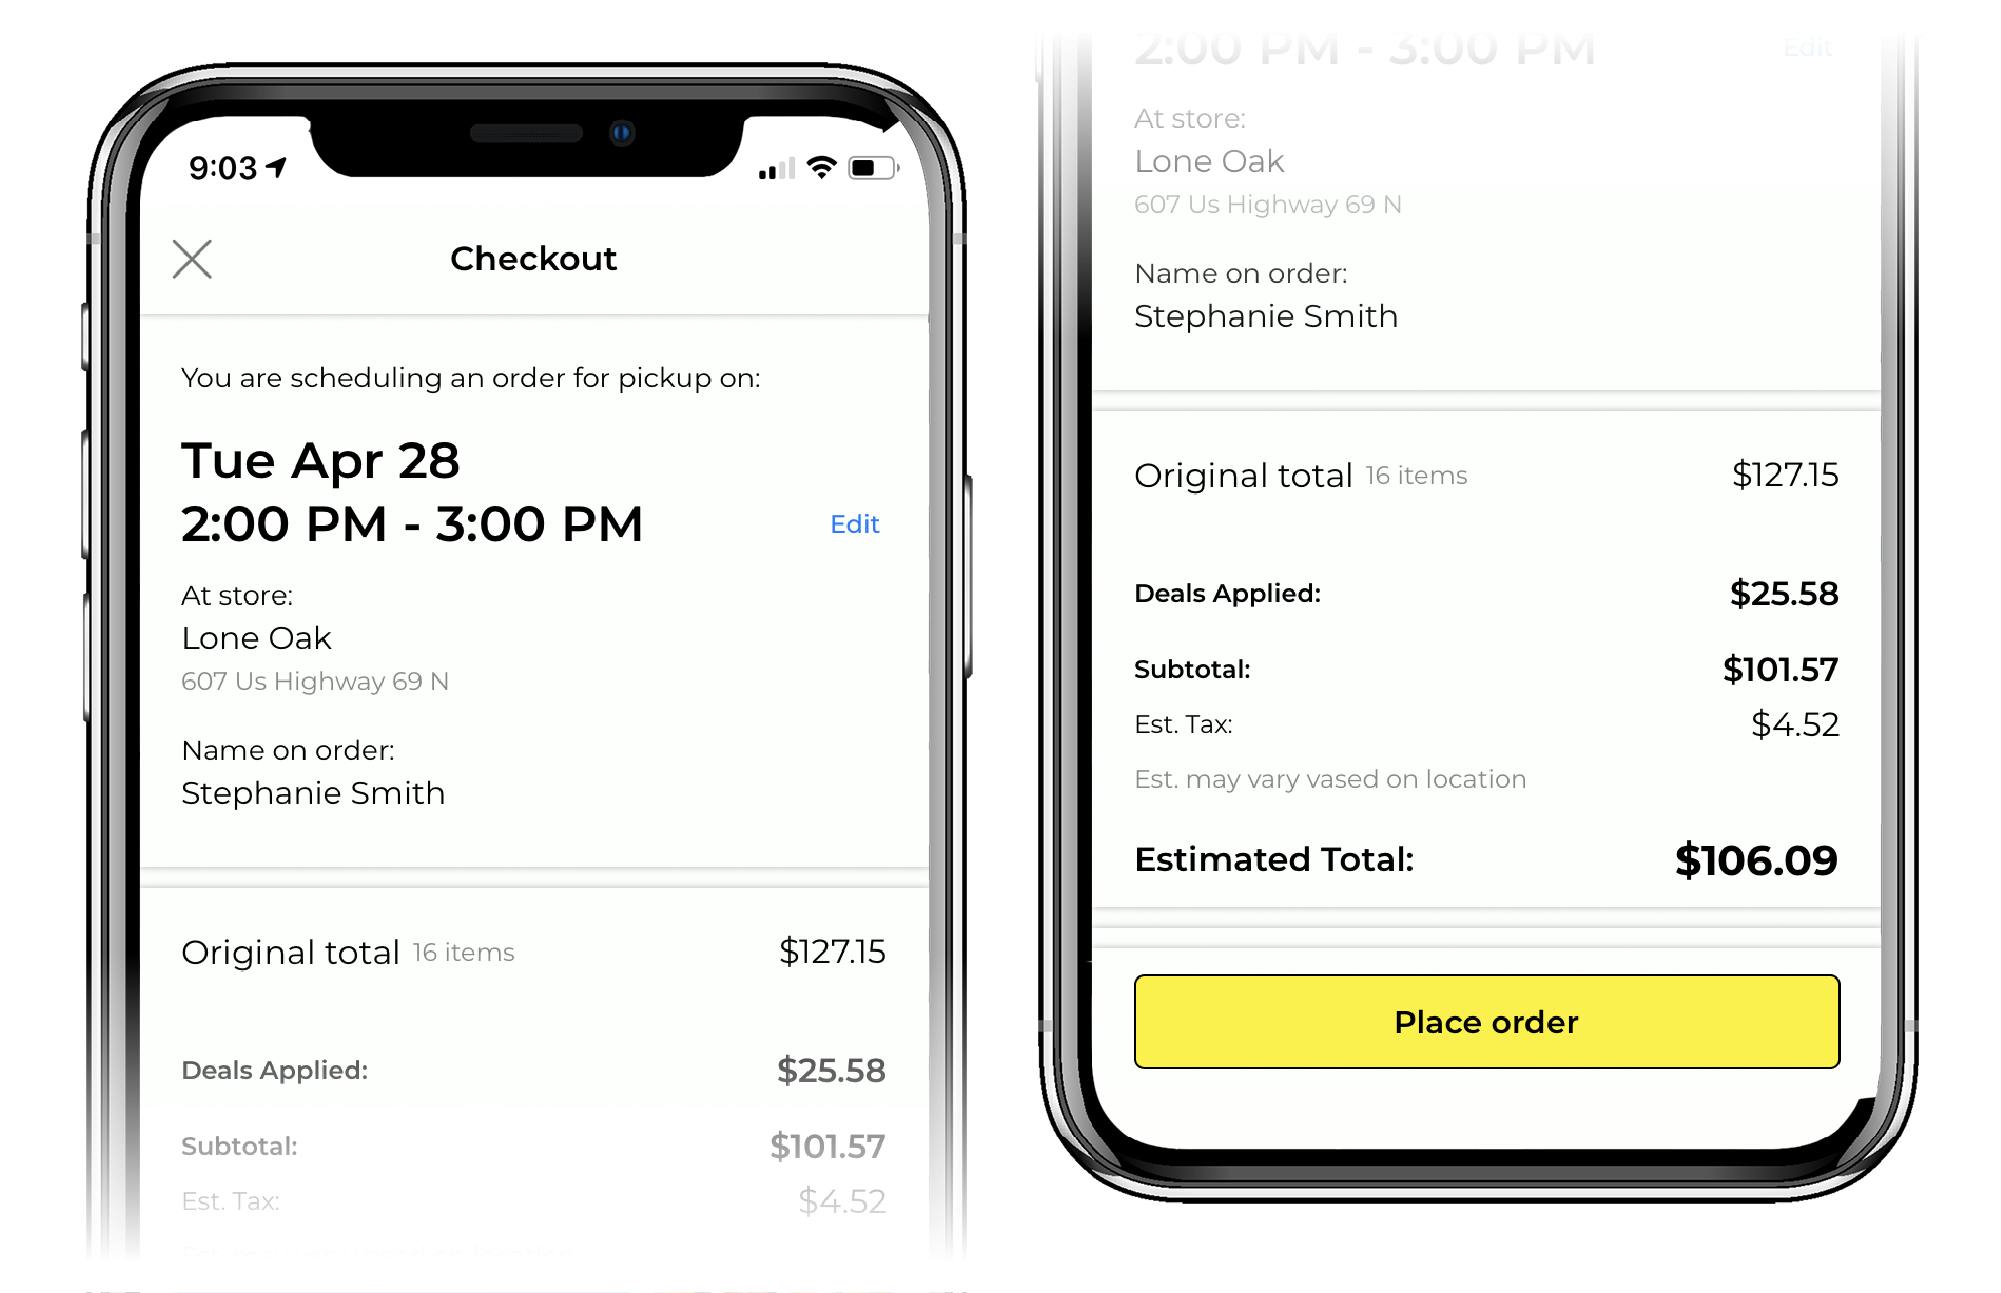 app shows cart checkout total of $106 and a time and date for pickup